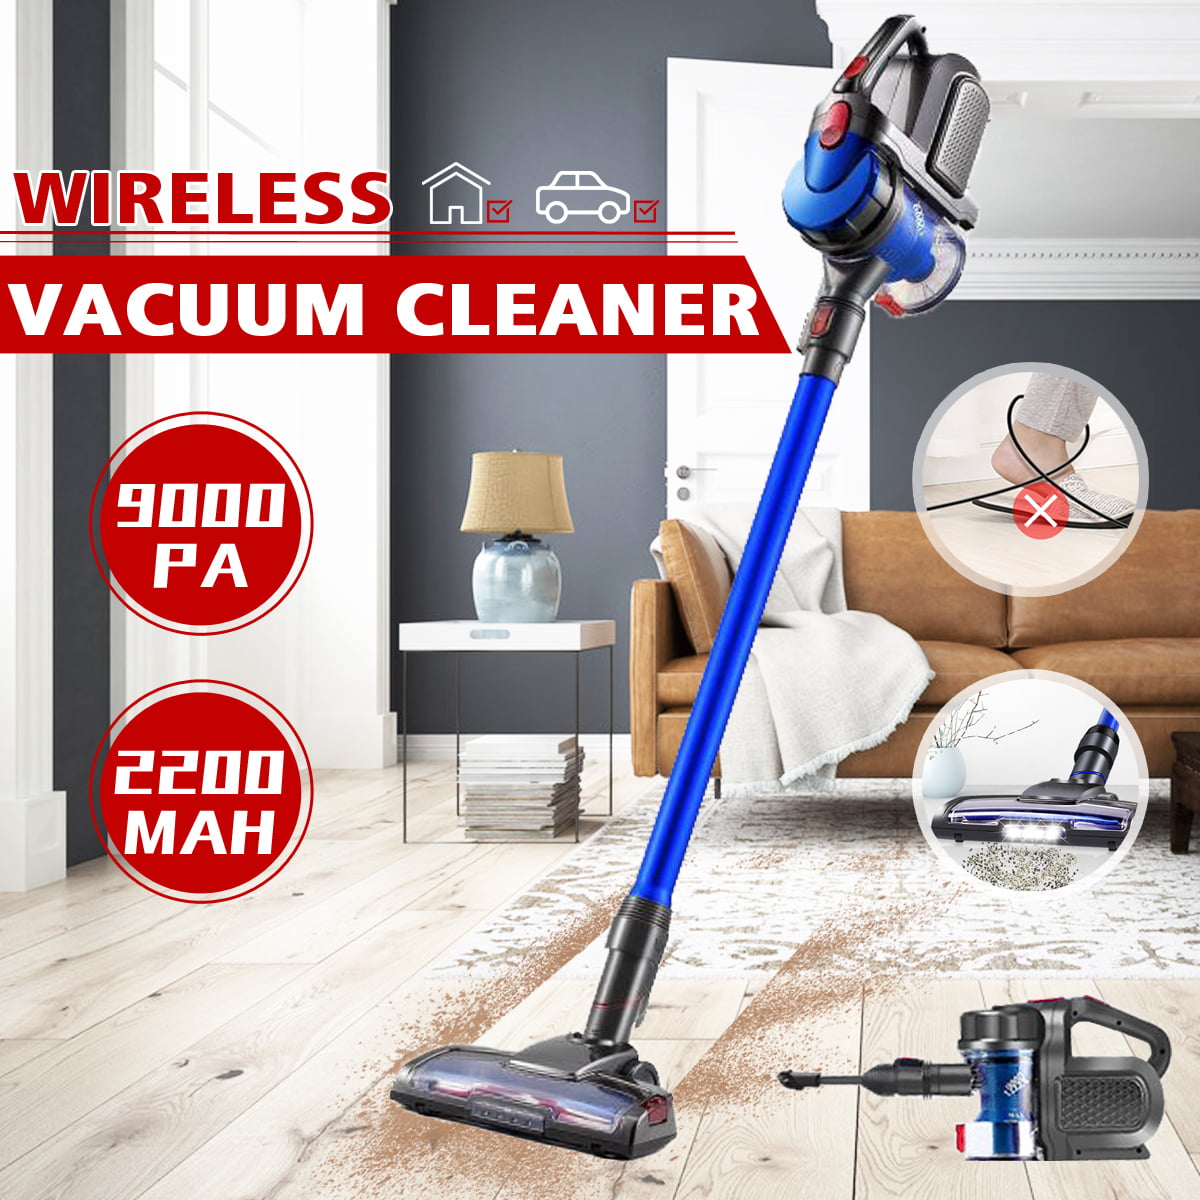 [9000Pa 2200MAH] Cordless Vacuum Cleaner] Powerful Suction Bagless Rechargeable 2 in 1 Handheld